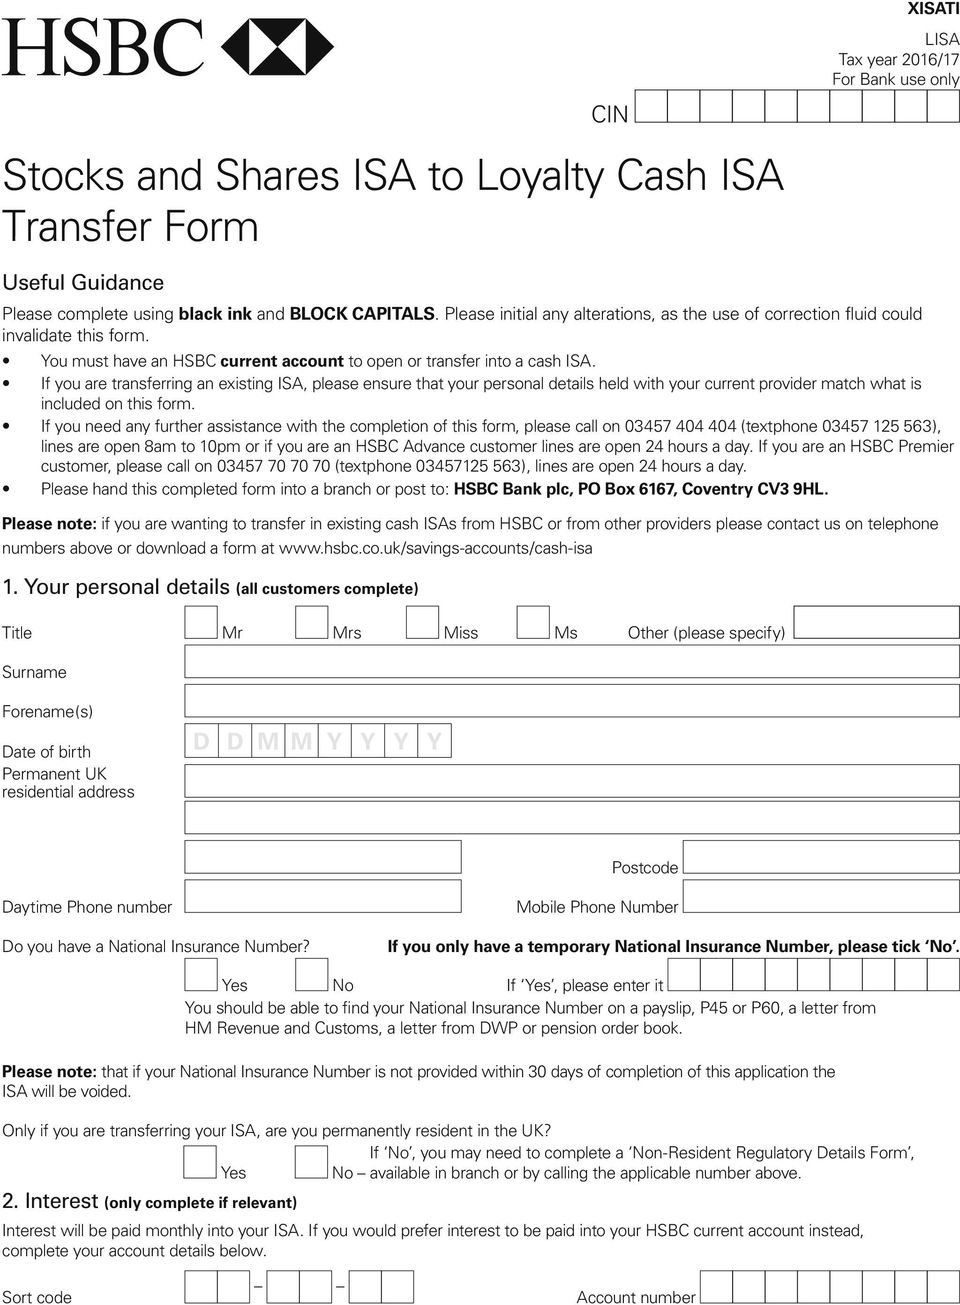 If you are transferring an existing ISA, please ensure that your personal details held with your current provider match what is included on this form.